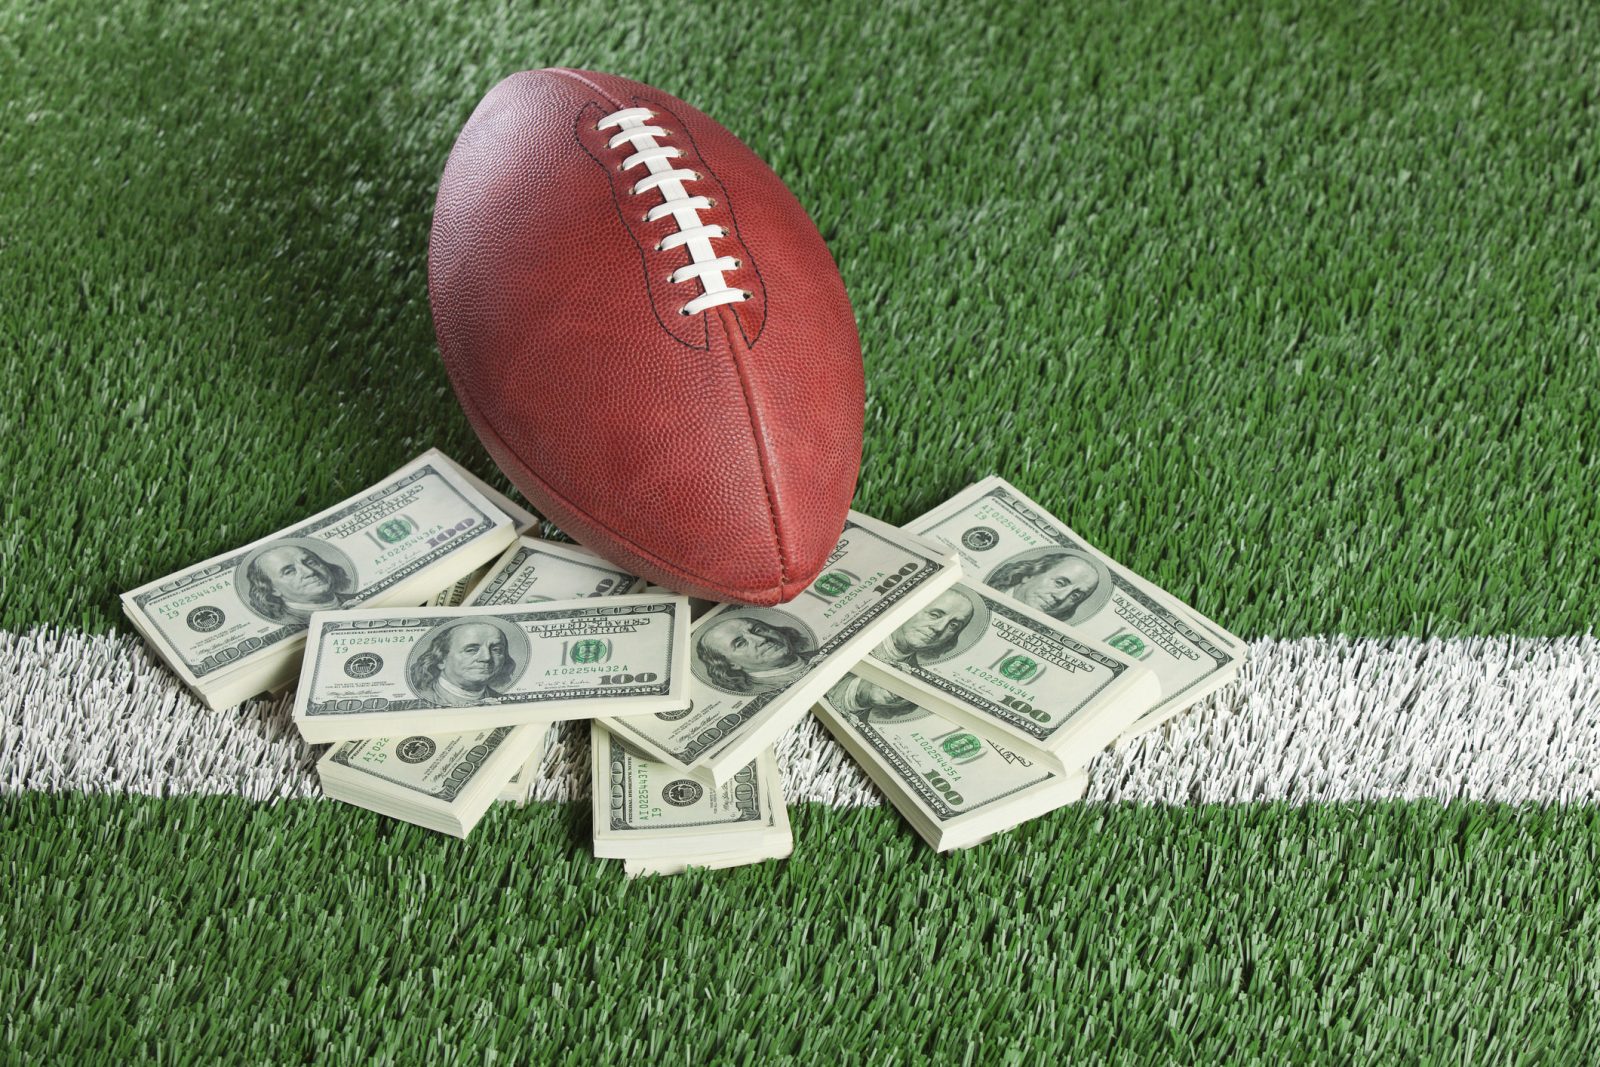 An football sits with a pile of money on a green field